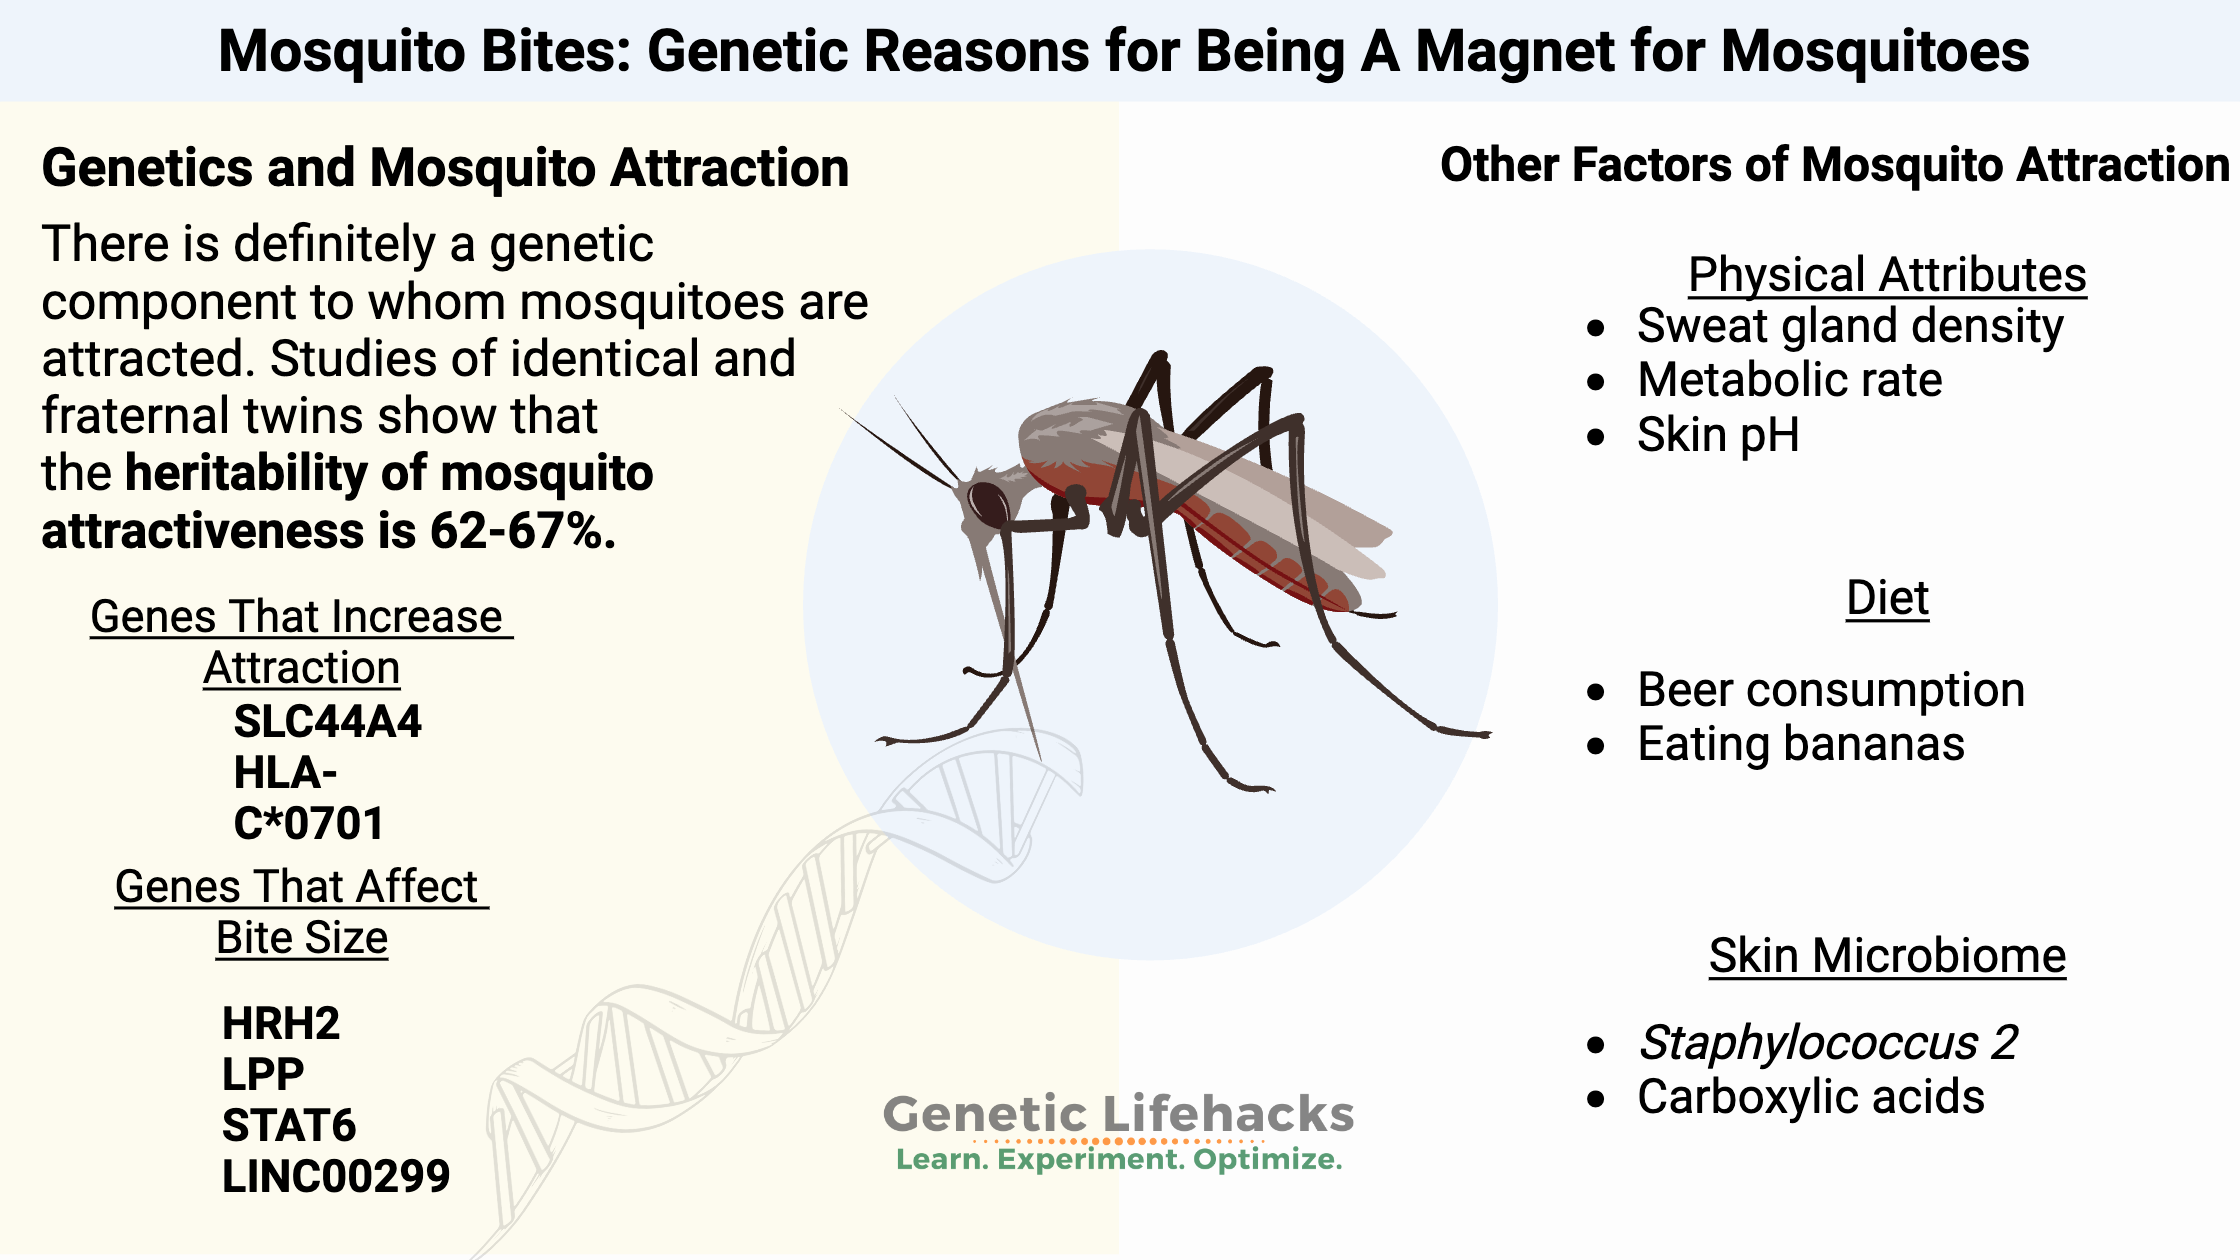 Mosquito Genes, Factors that affect who mosquitos are attracted to